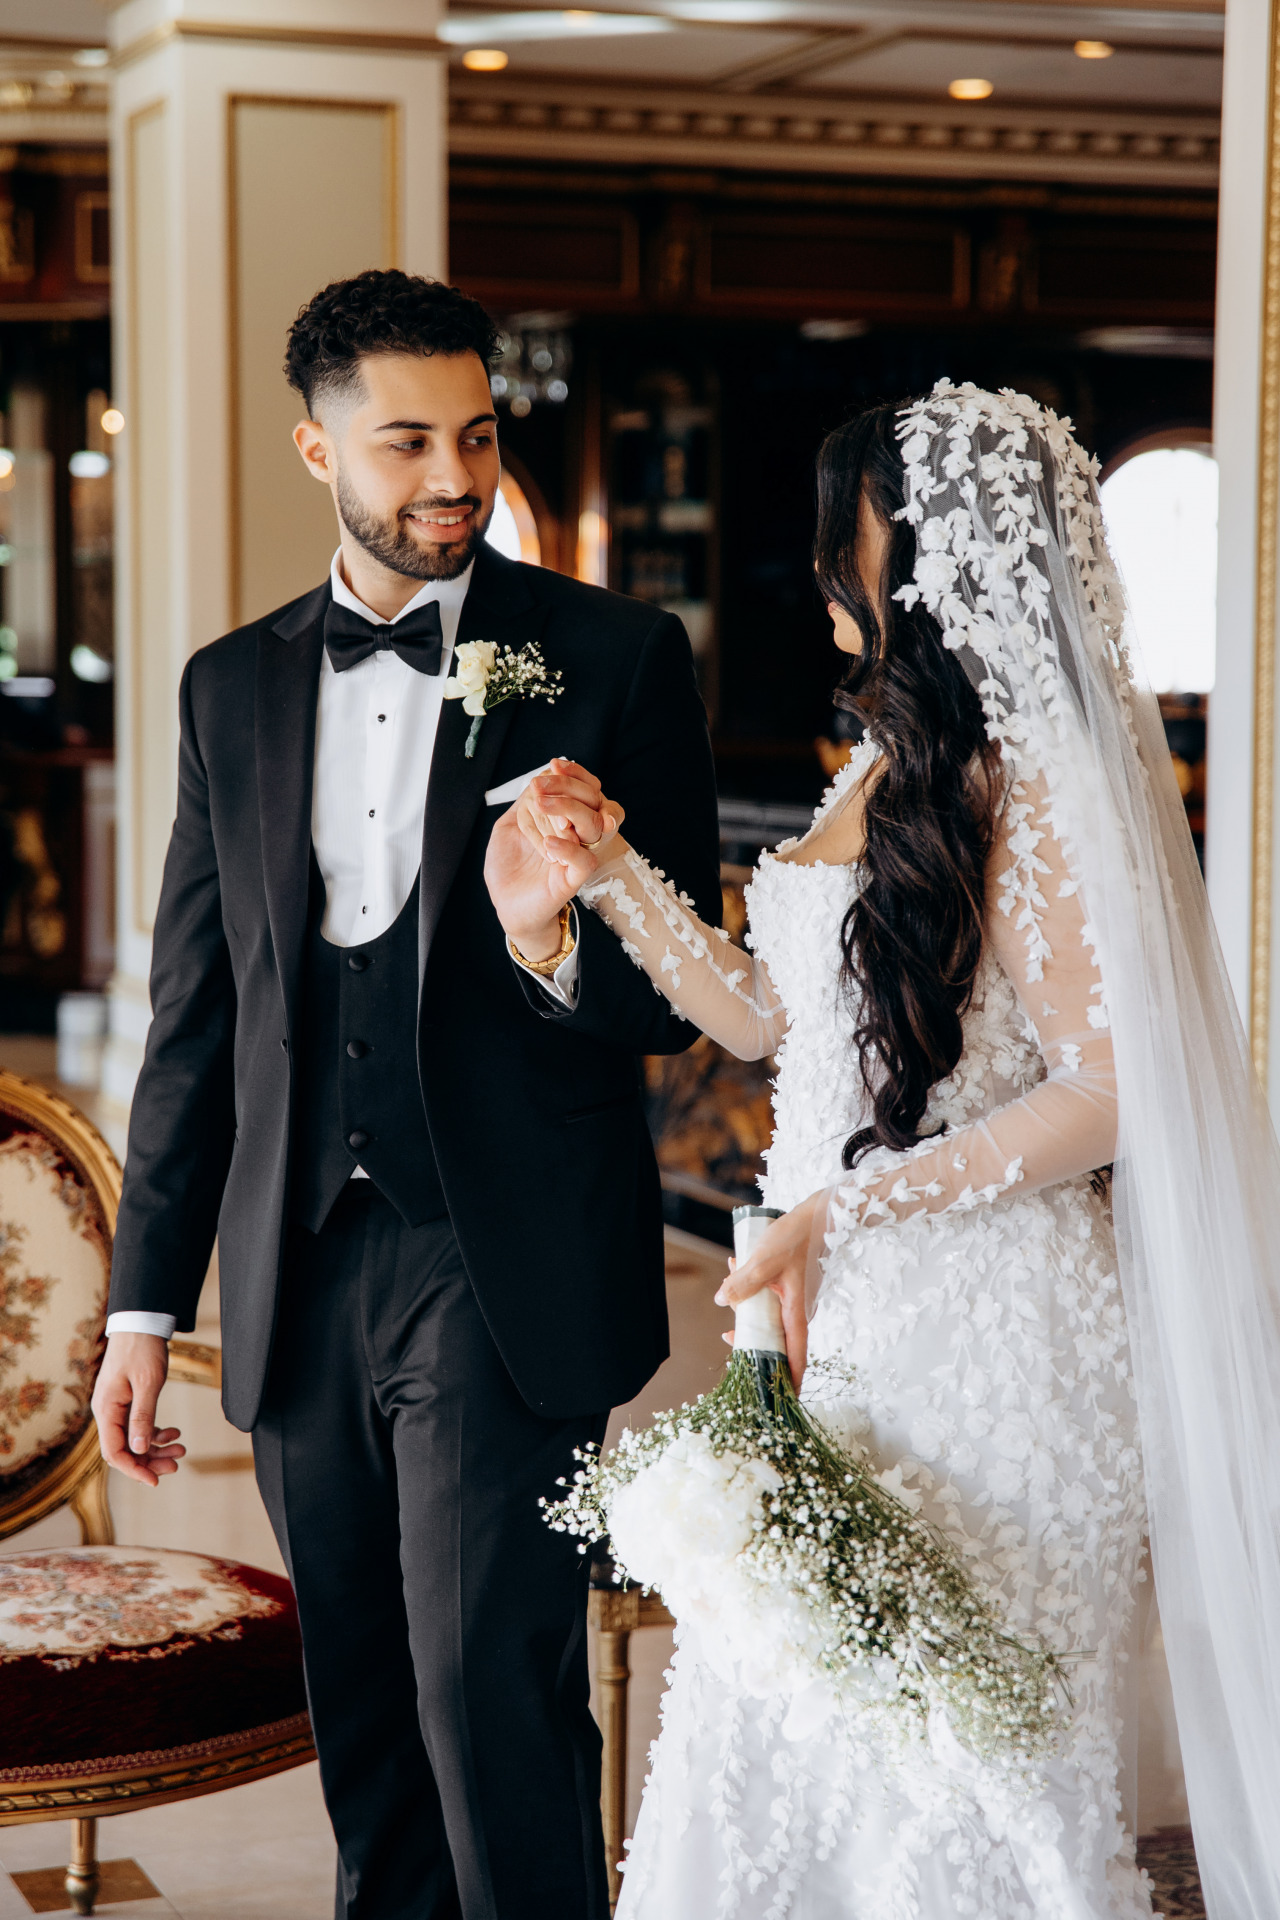 Egyprian coptic wedding editorial style in New Jersey 57